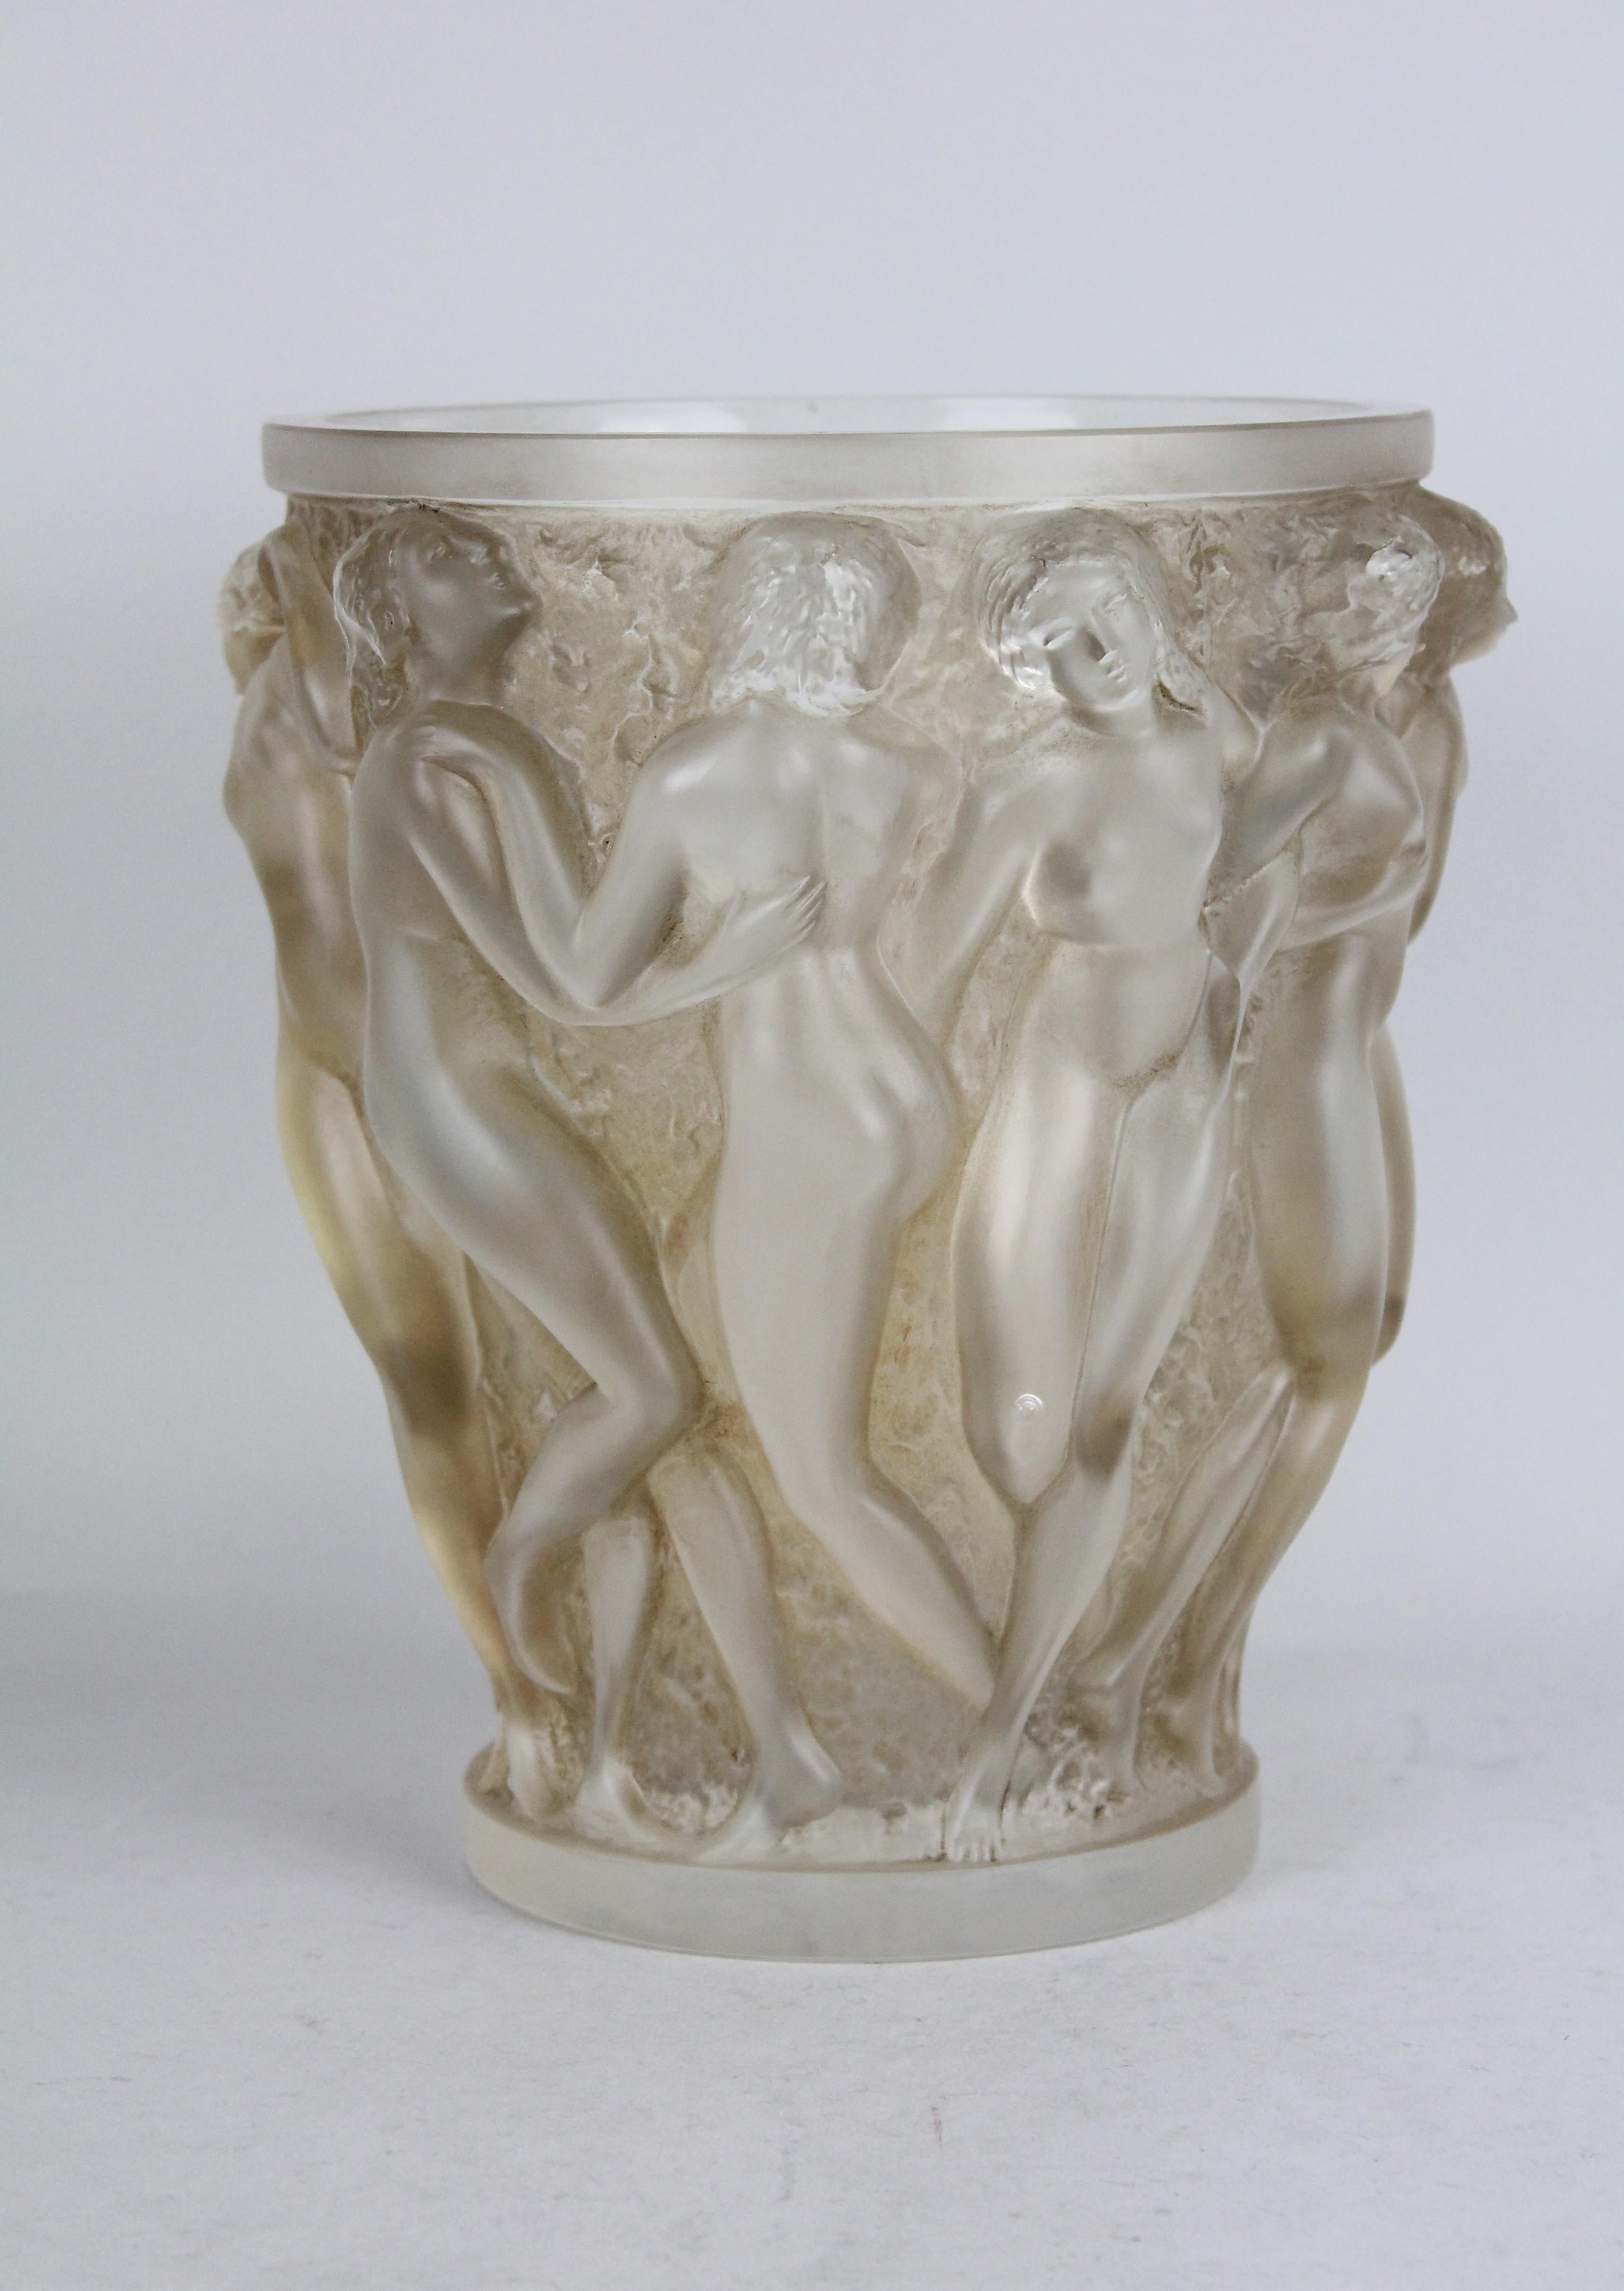 René Lalique Bacchantes vase, design 1927.
This example is clear, frosted, and sepia stained.

The vase is not a newly made reproduction.
It is an early post-war example! 

Litterature: Félix Marcilhac, 